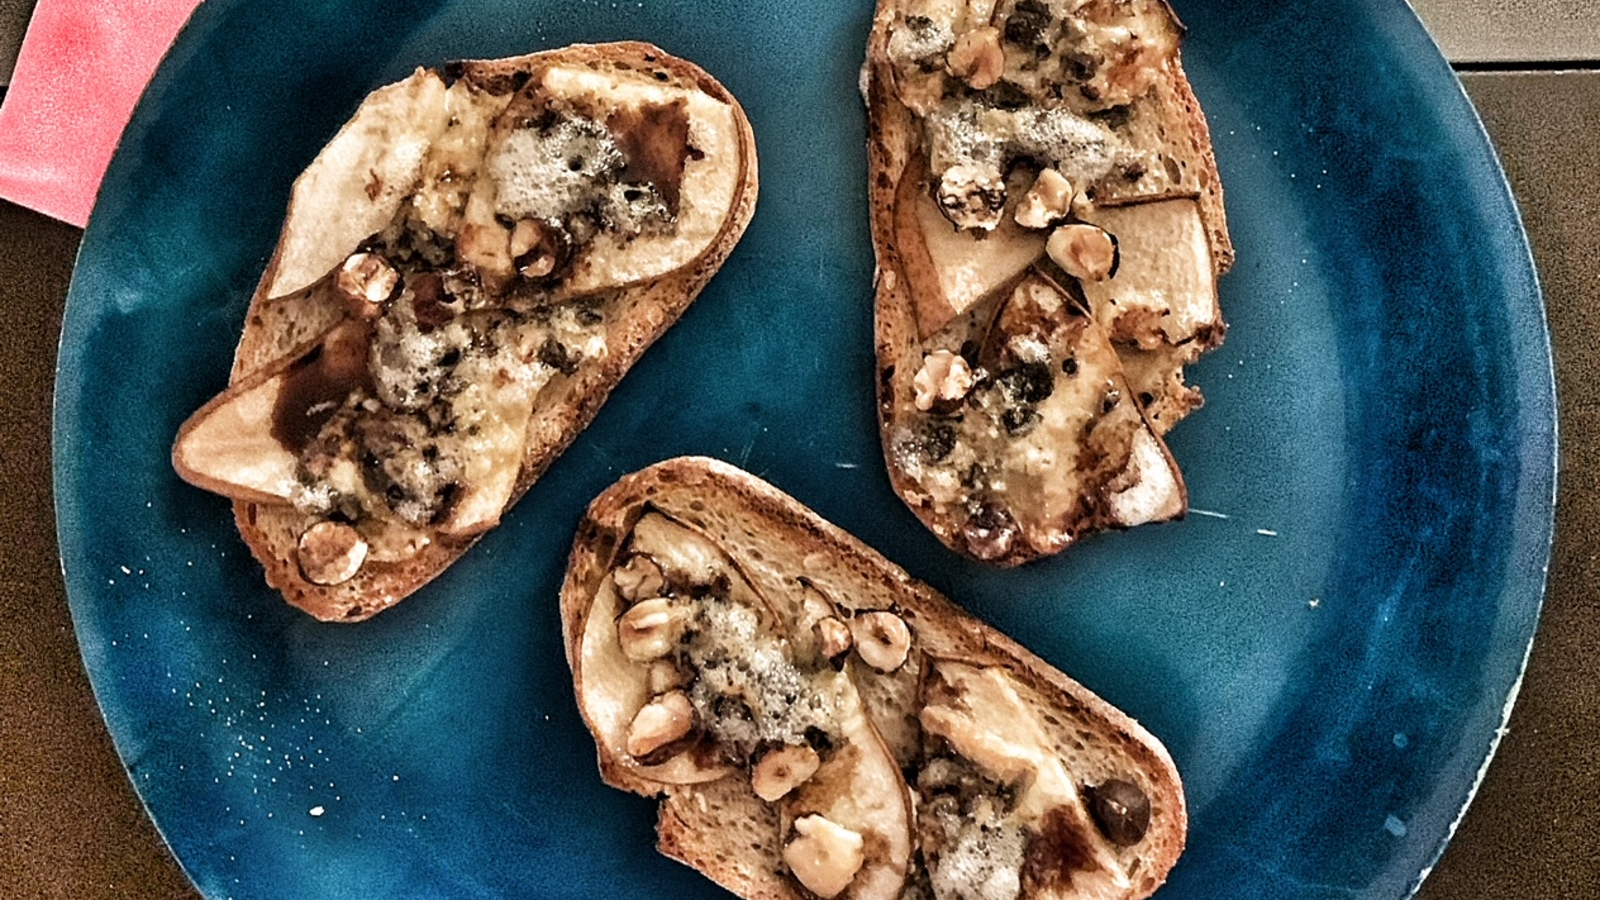 Image of Apple and Stilton toast with balsamic vinegar